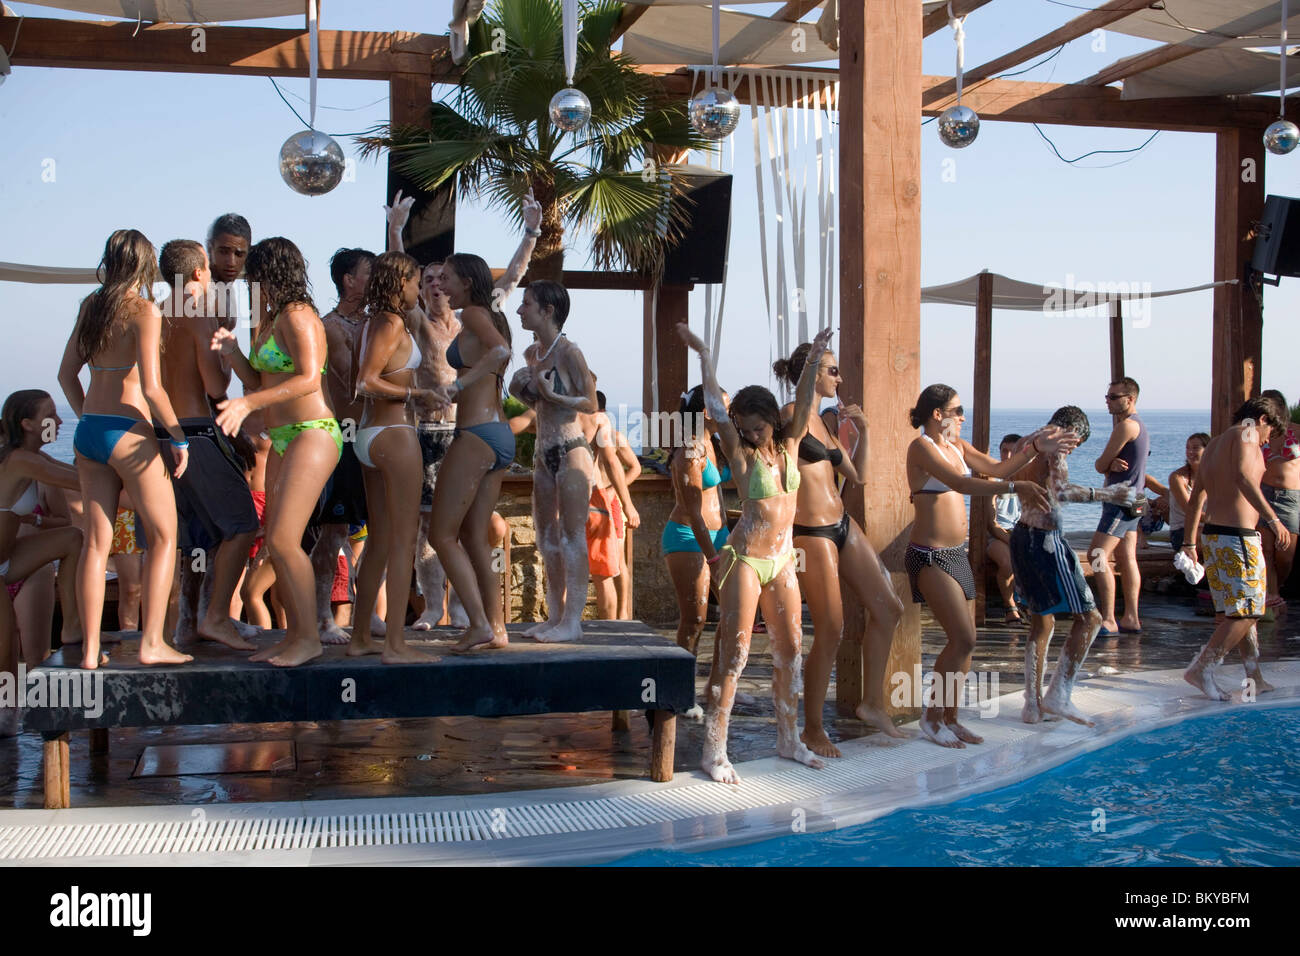 https://c8.alamy.com/comp/BKYBFM/young-people-dancing-during-a-beach-party-at-a-pool-of-the-paradise-BKYBFM.jpg